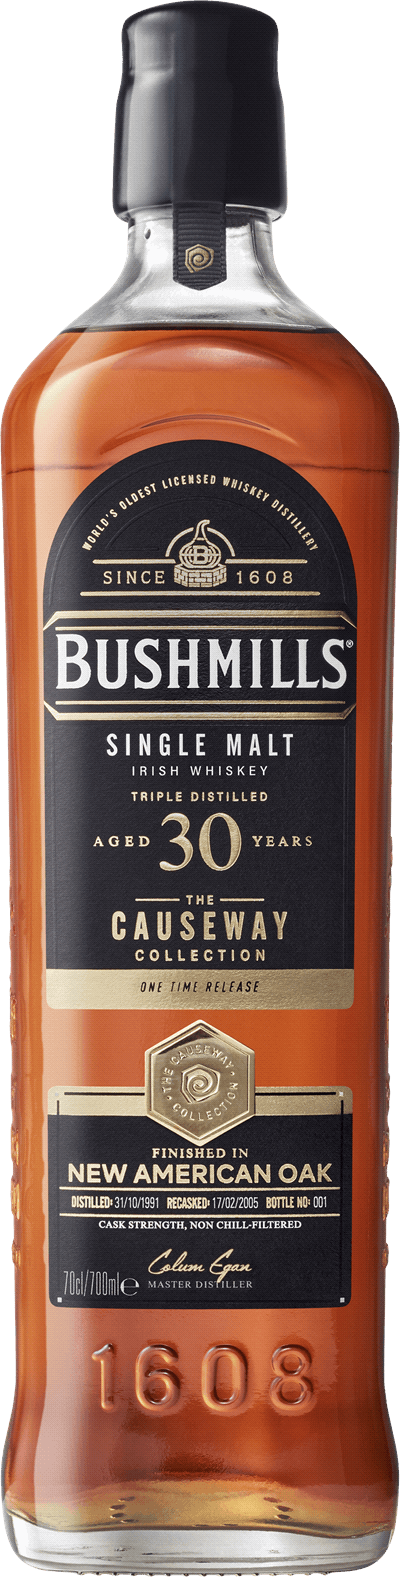 Bushmills Causeway Collection 30 Years